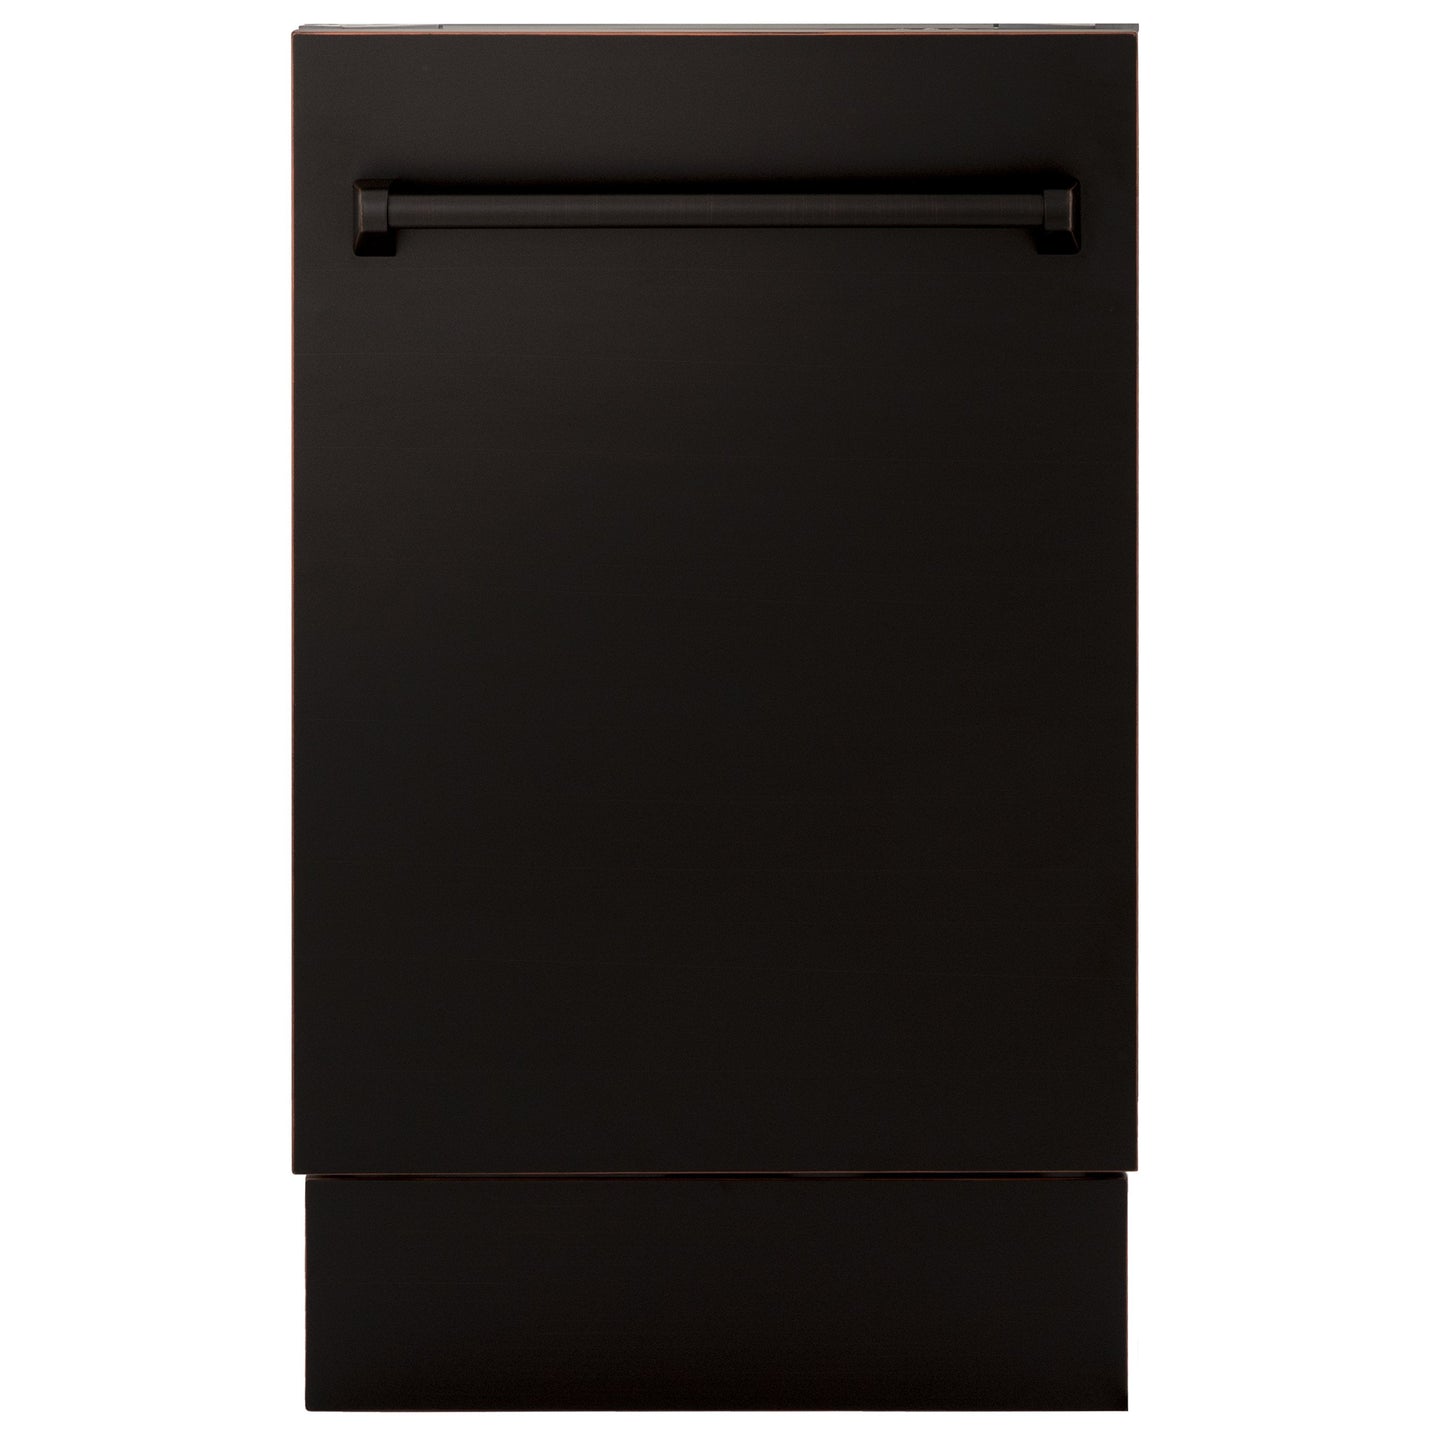 ZLINE 18 in. Top Control Tall Dishwasher in Oil Rubbed Bronze with 3rd Rack